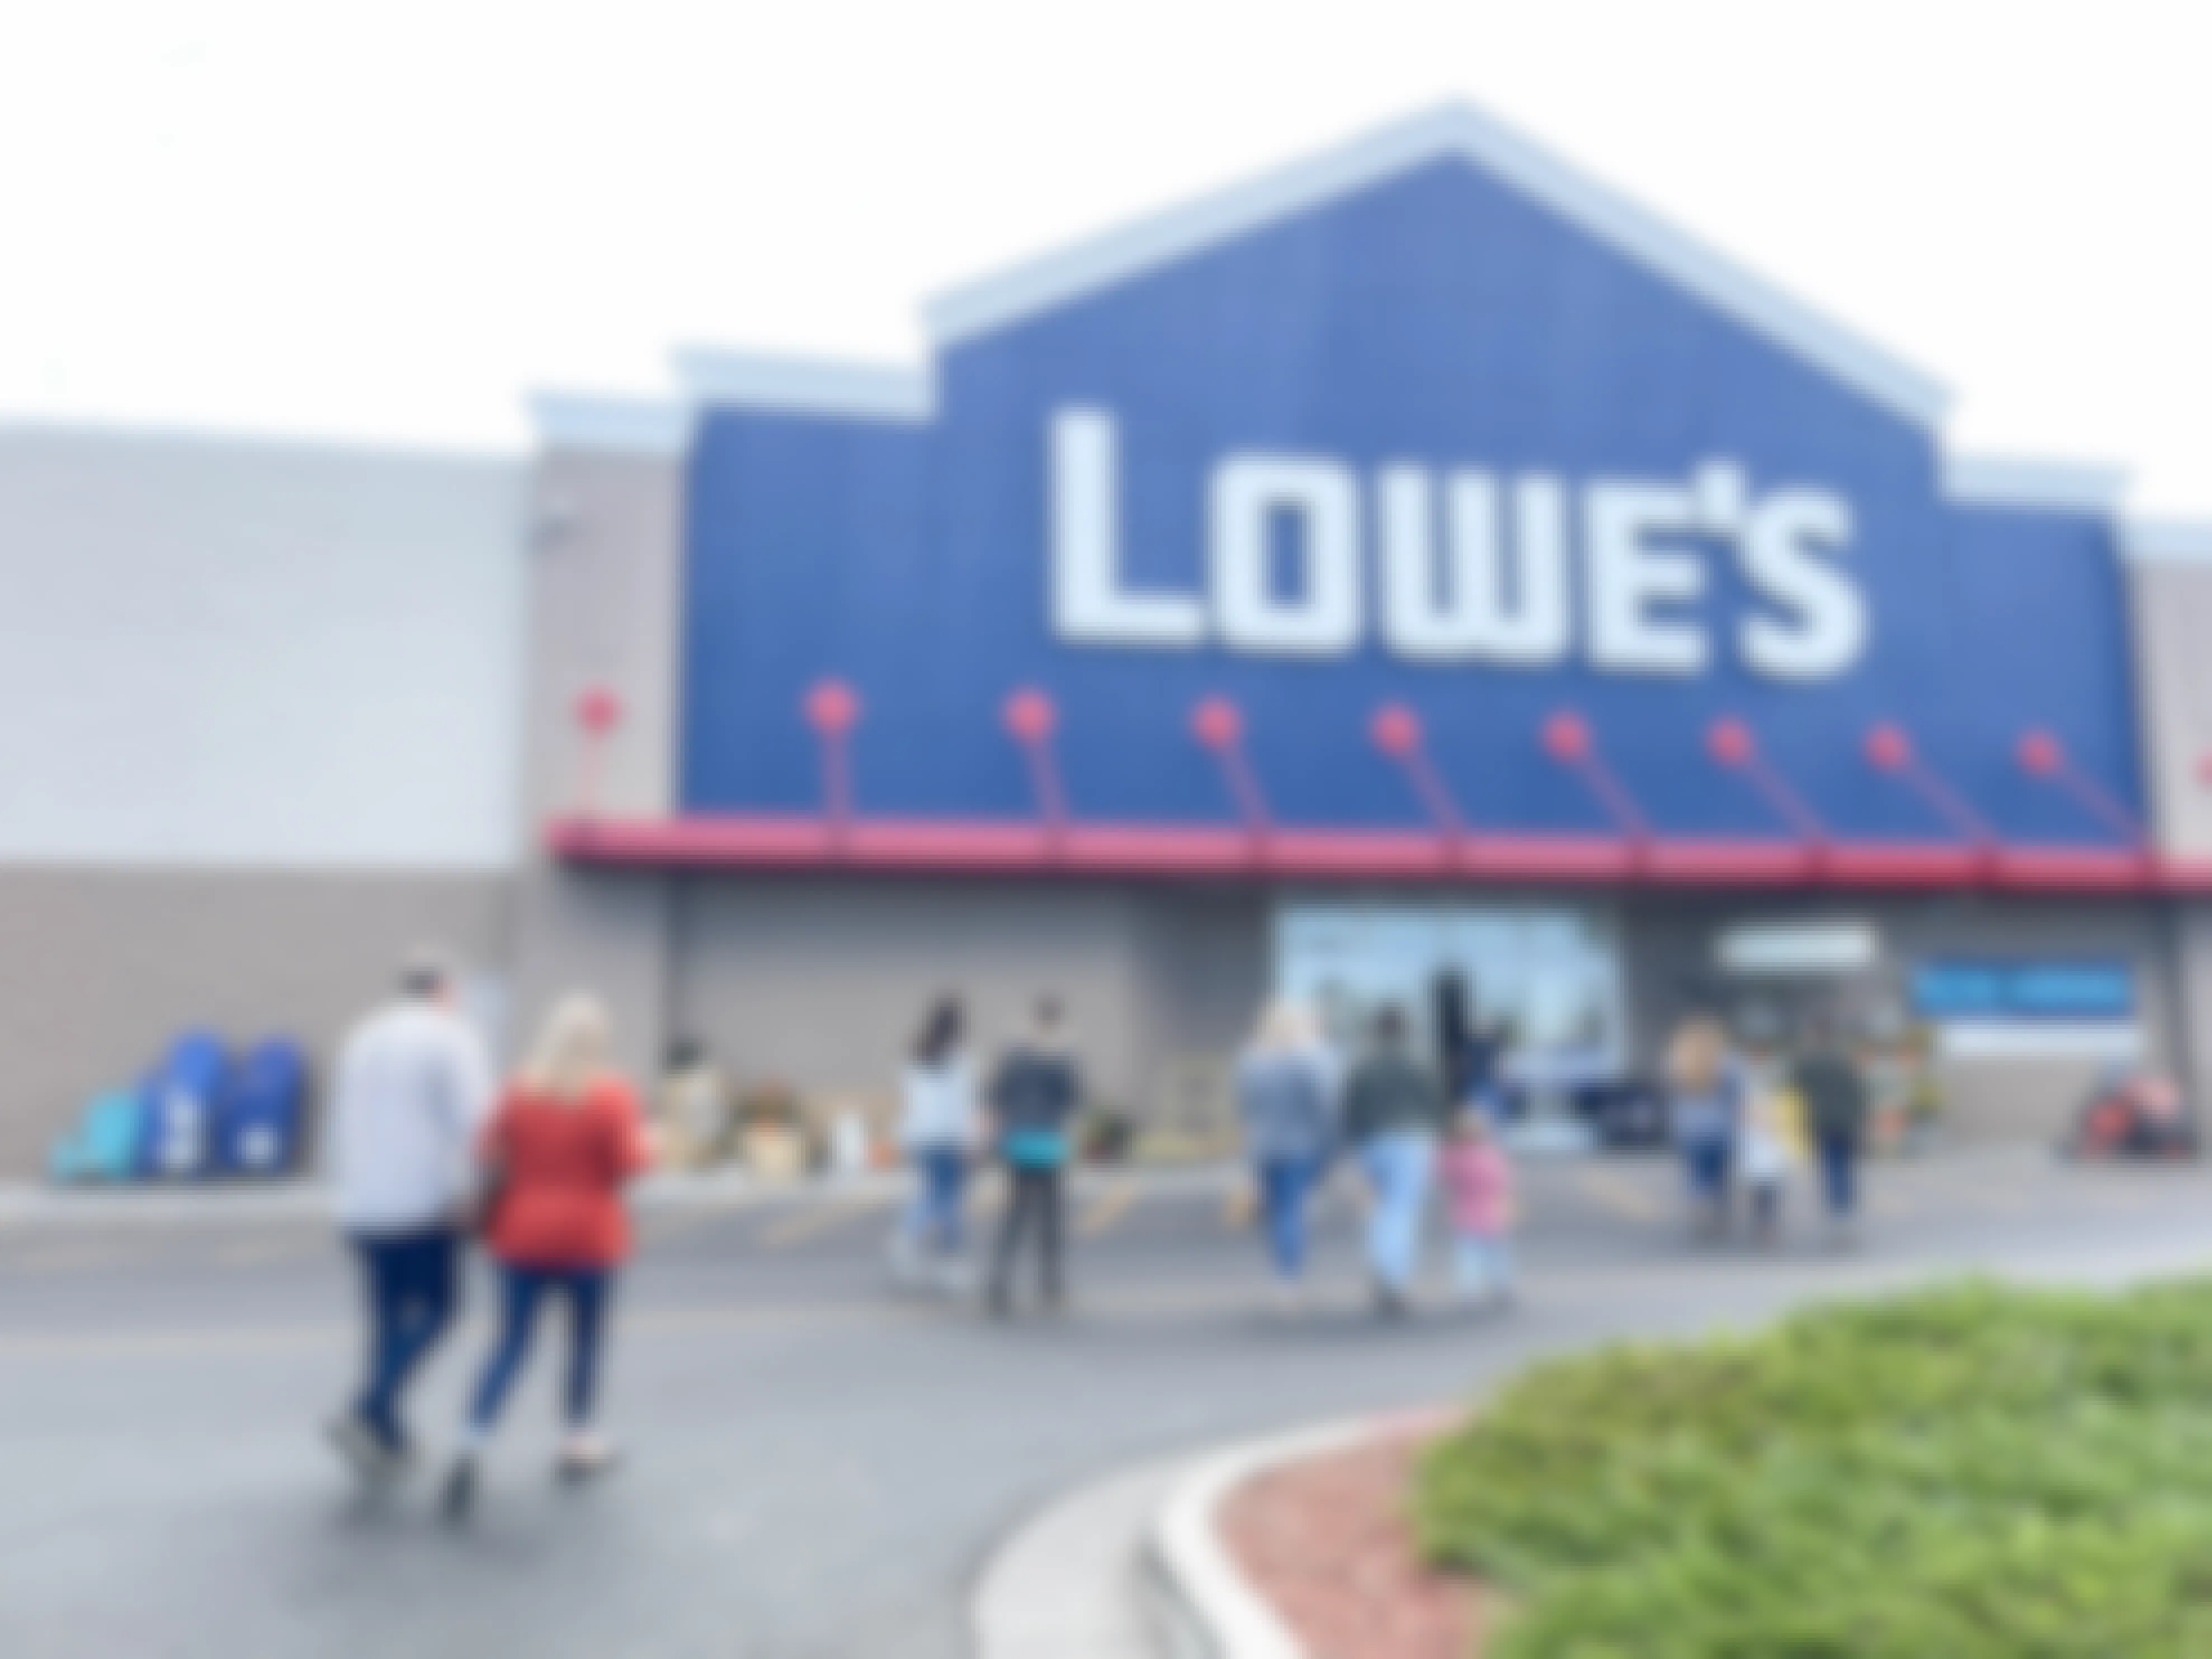 Join the Free Lowe's Bucket Ball Challenge Event on March 11